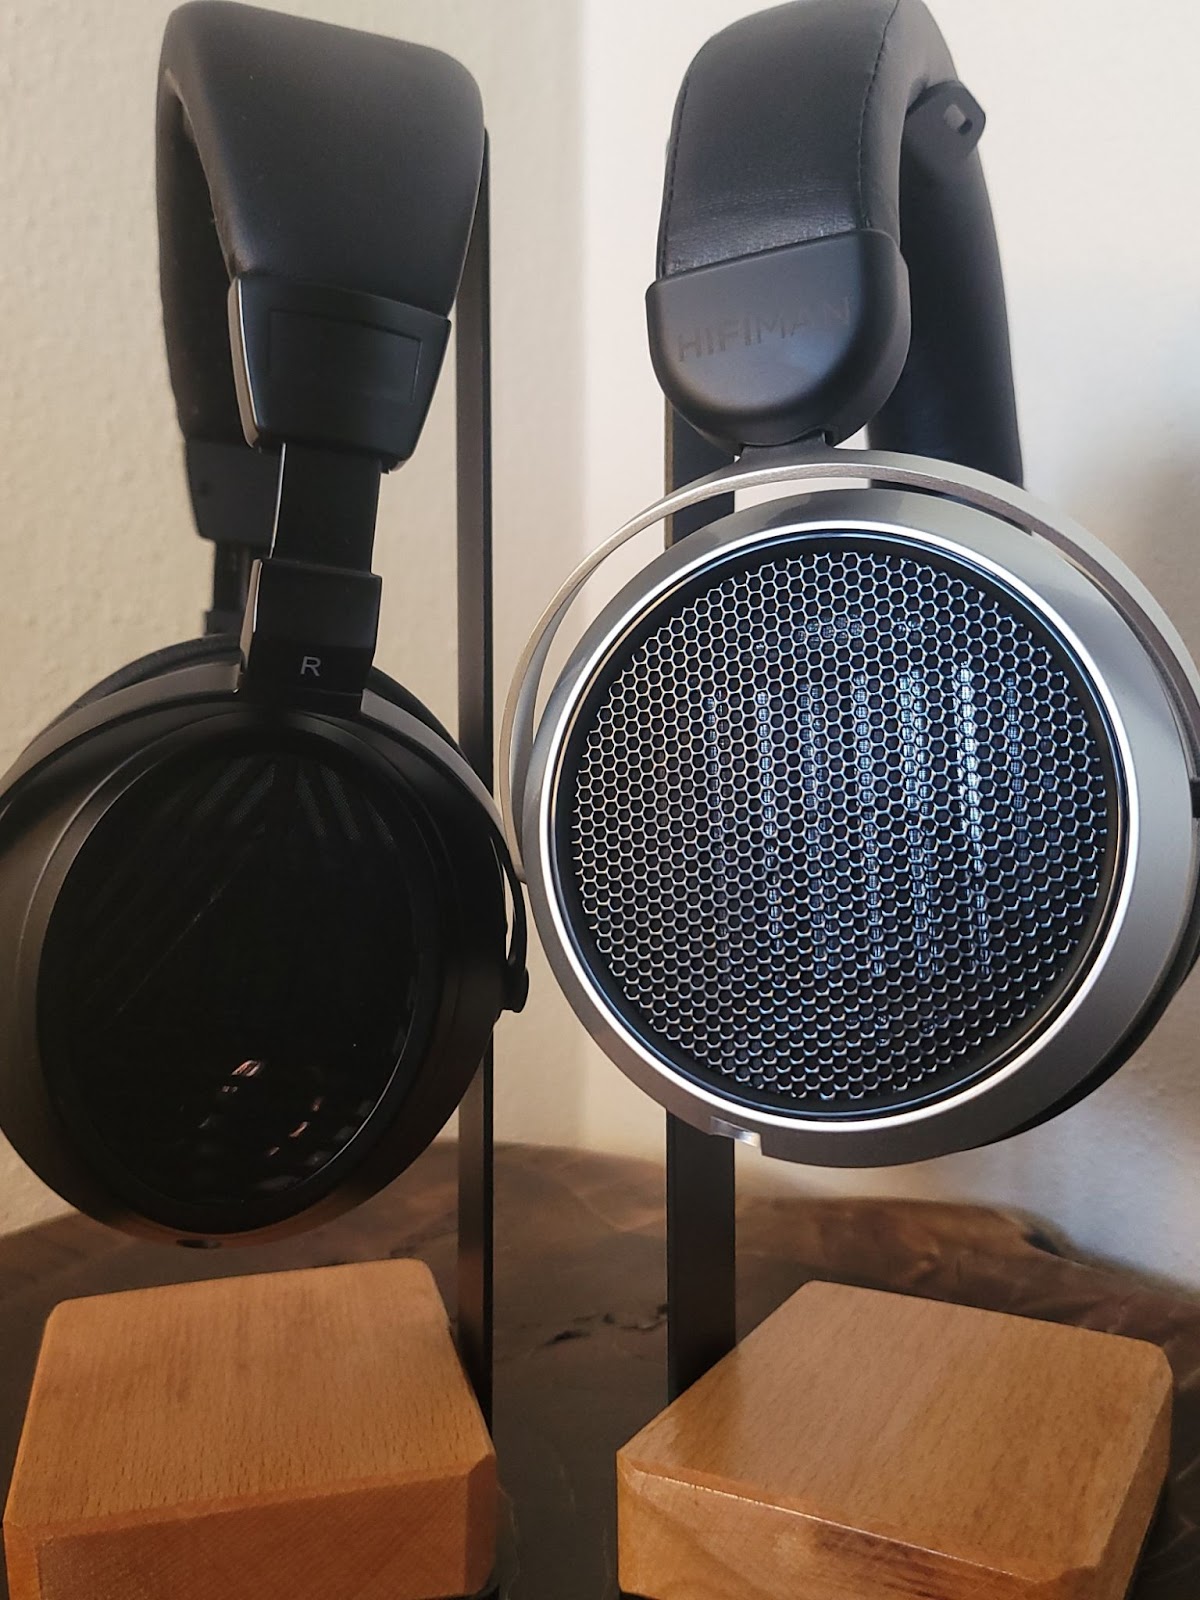 HIFIMAN HE400se | Headphone Reviews and Discussion - Head-Fi.org